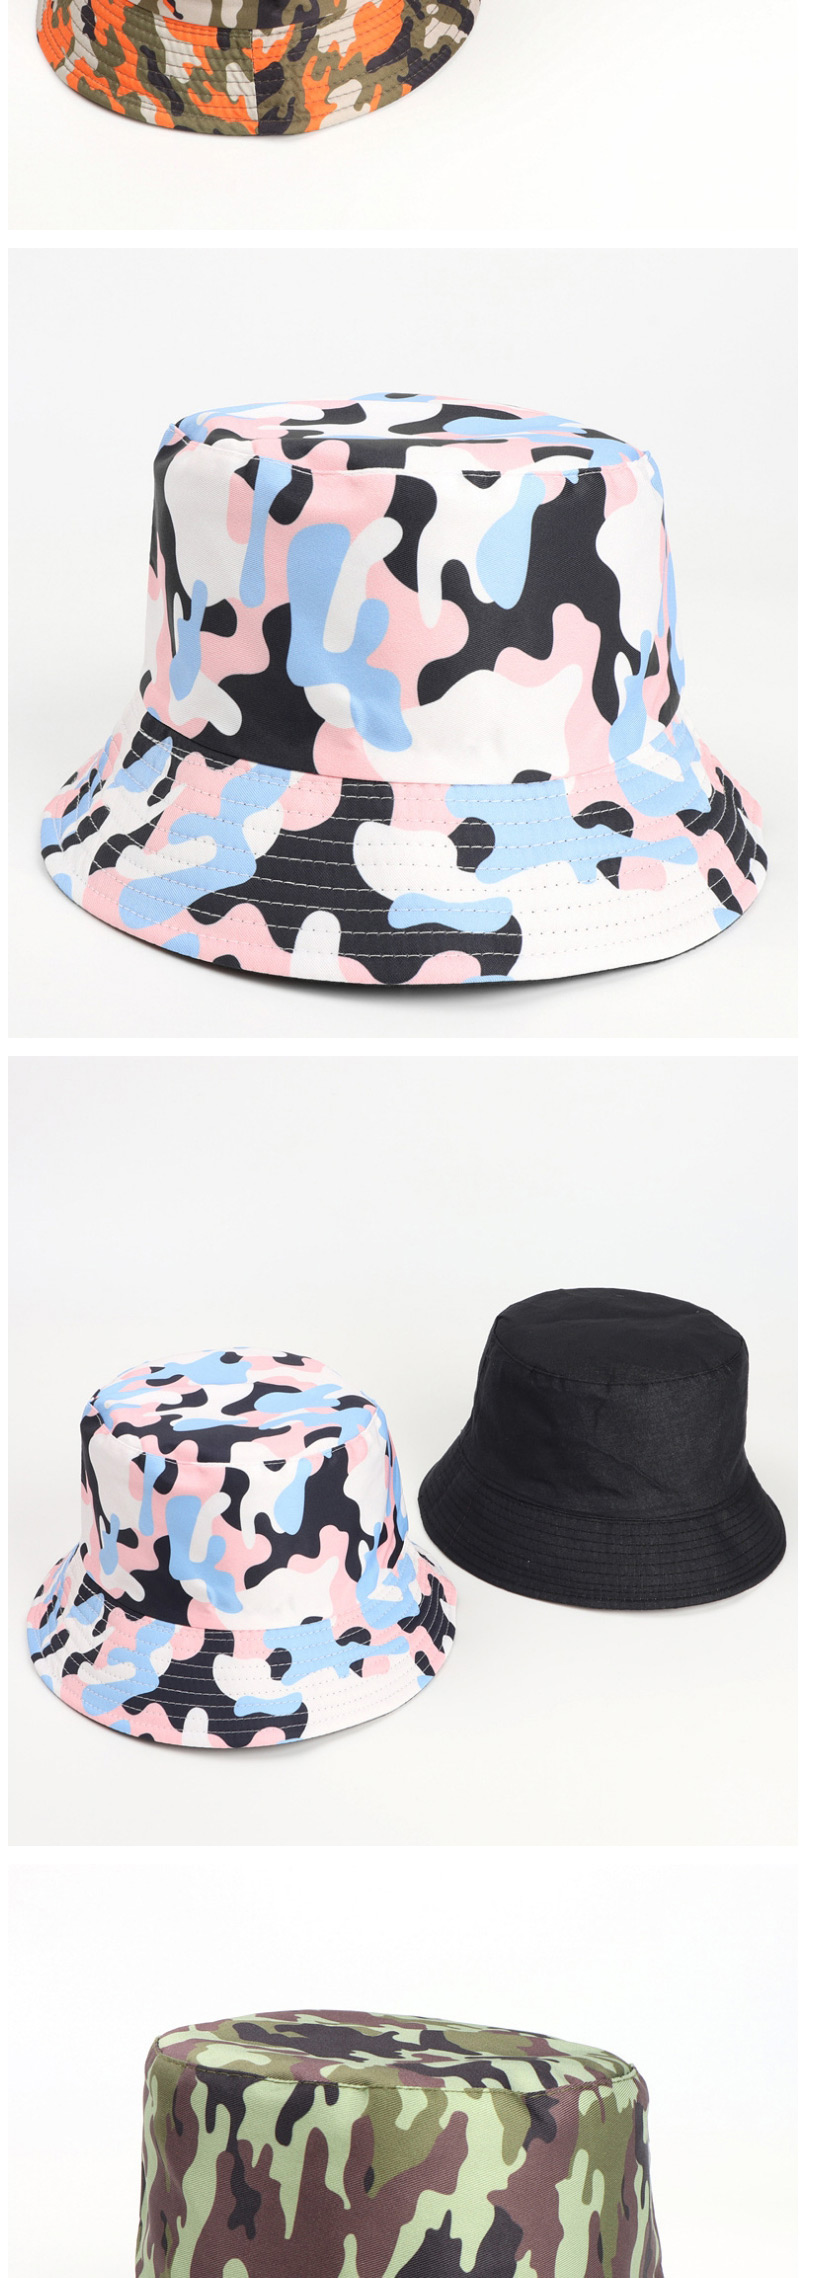 Fashion Digital Camouflage-coffee Printed Double-sided Multicolor Camouflage Fisherman Hat,Sun Hats